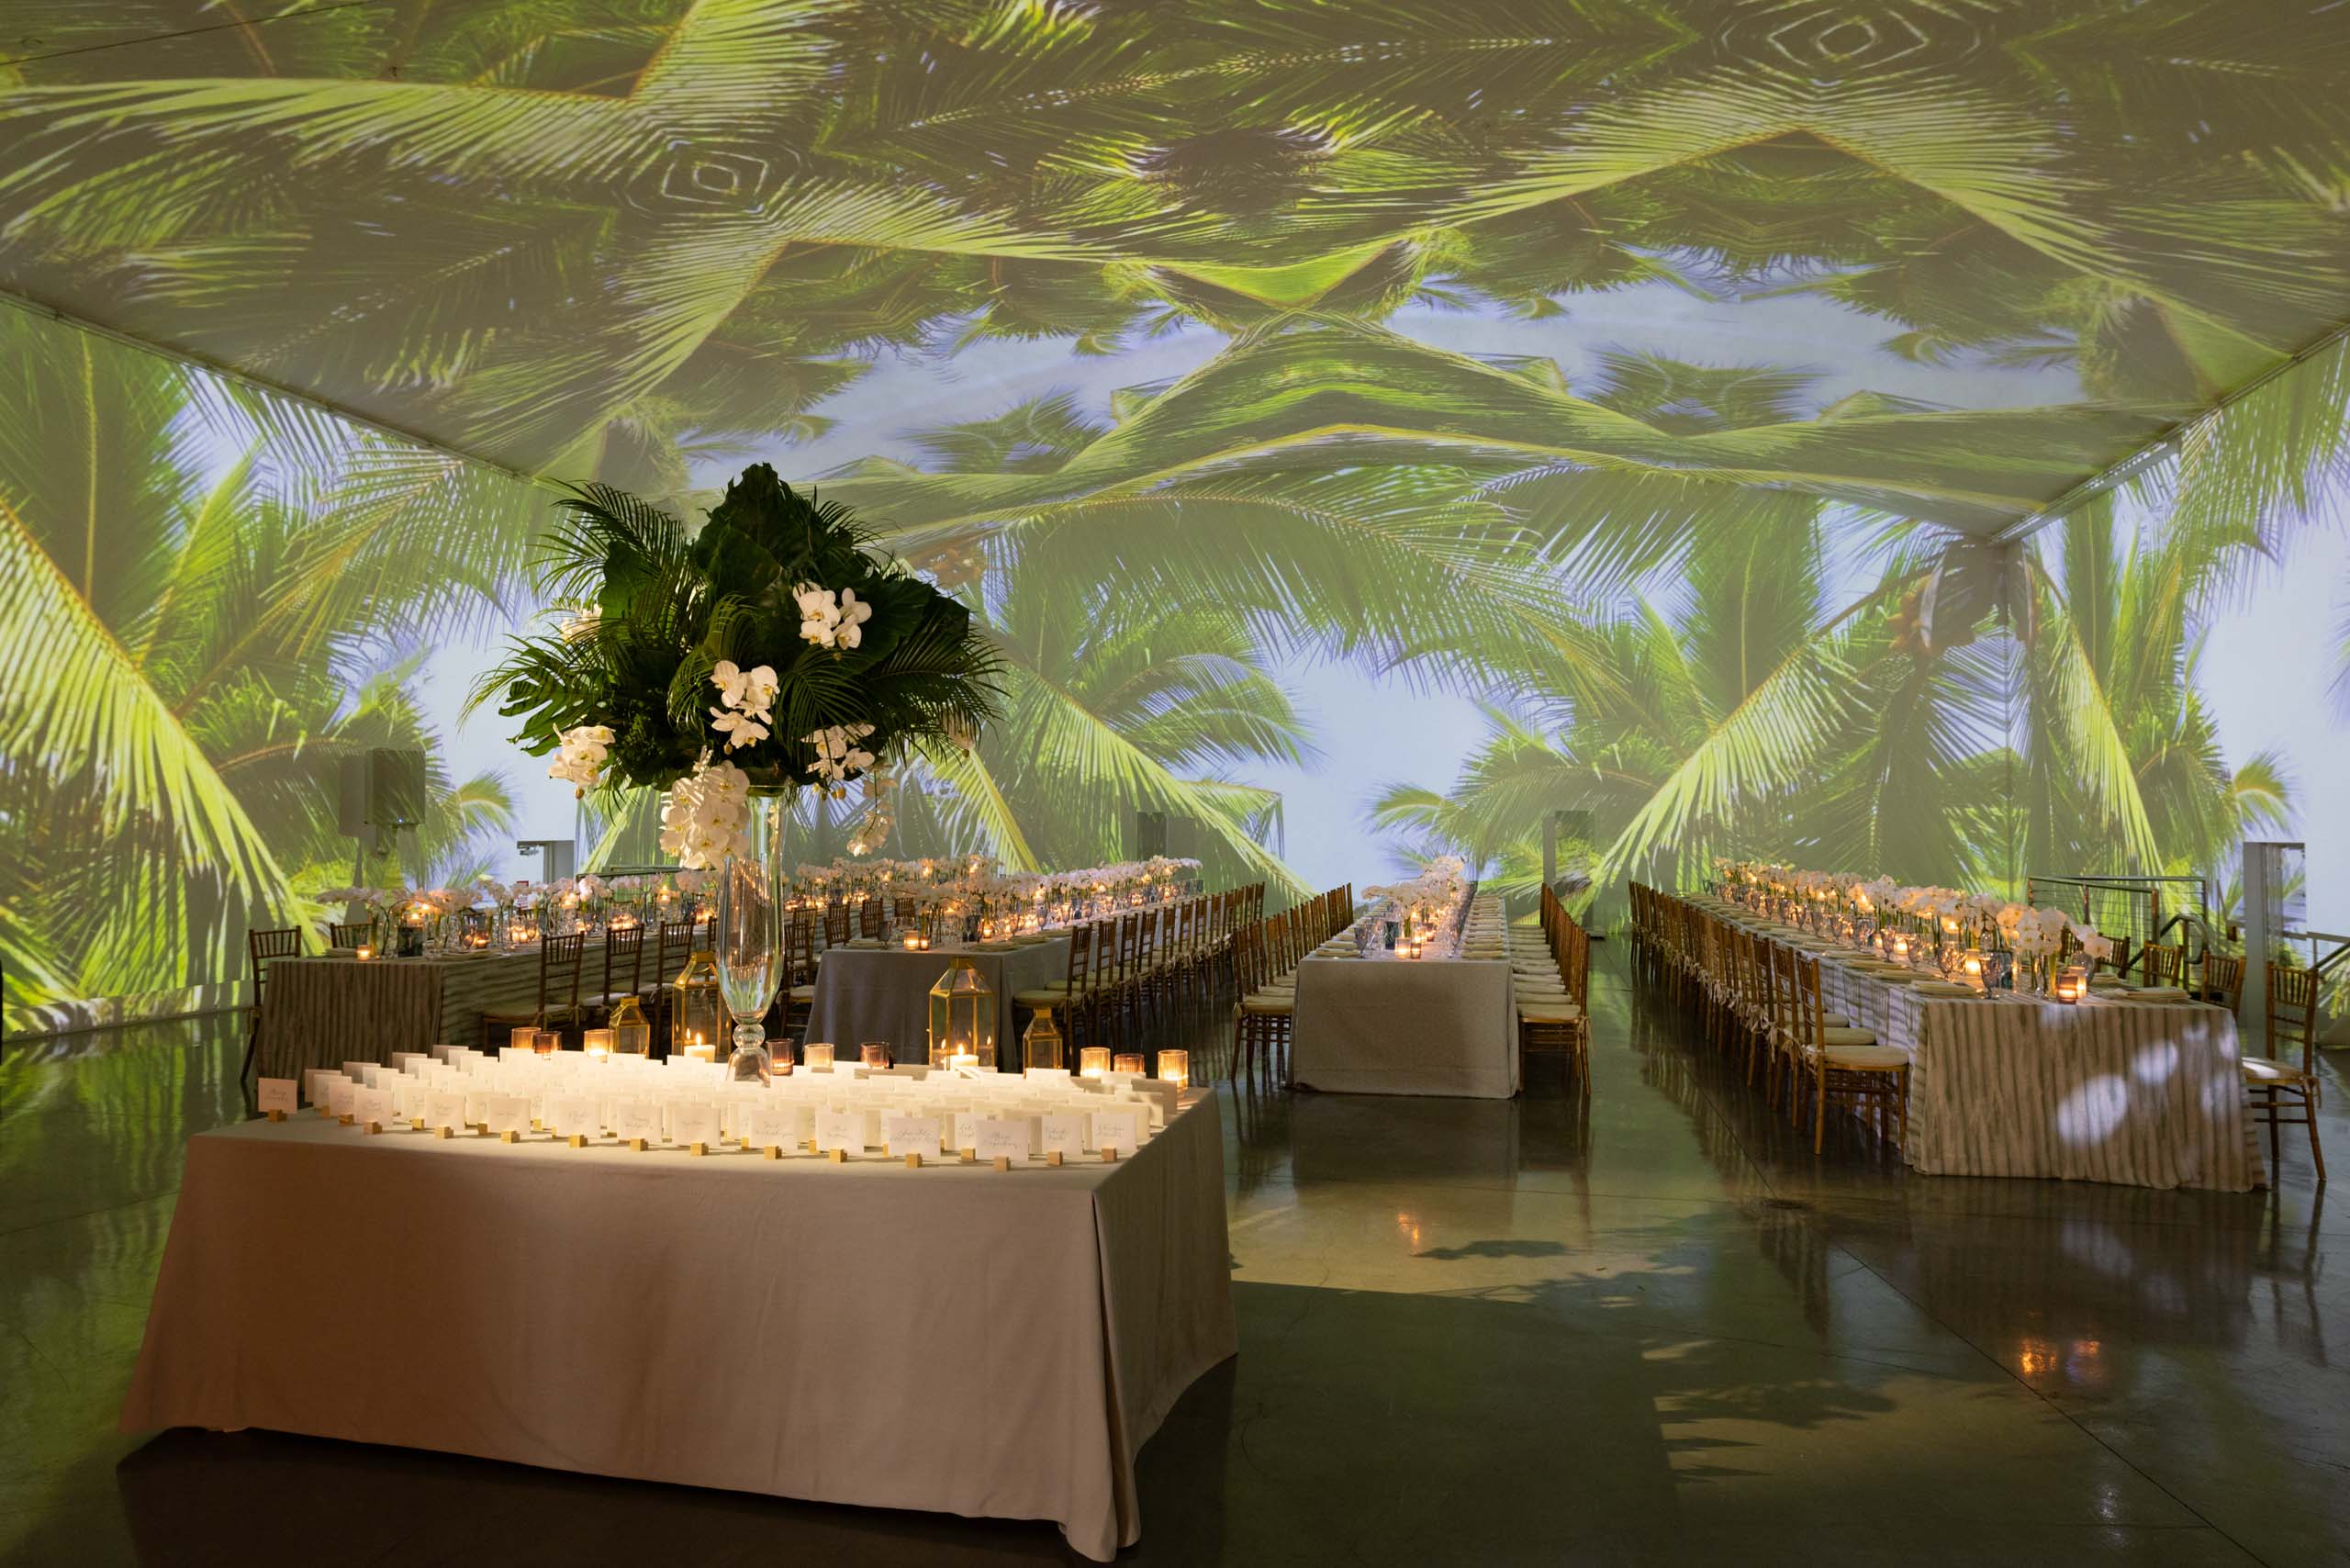 tables decorated for an event dinner in a tent with tropical decorations.